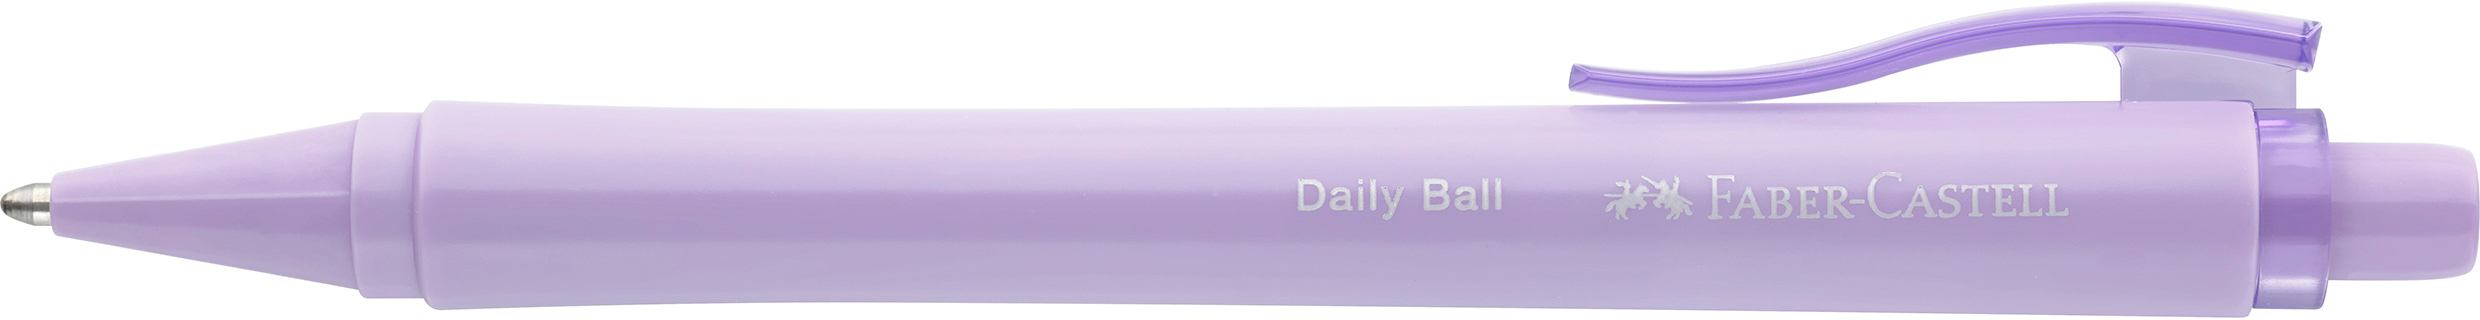 FABER-CASTELL Stylo à bille Daily Ball XB 140688 sweet lilac